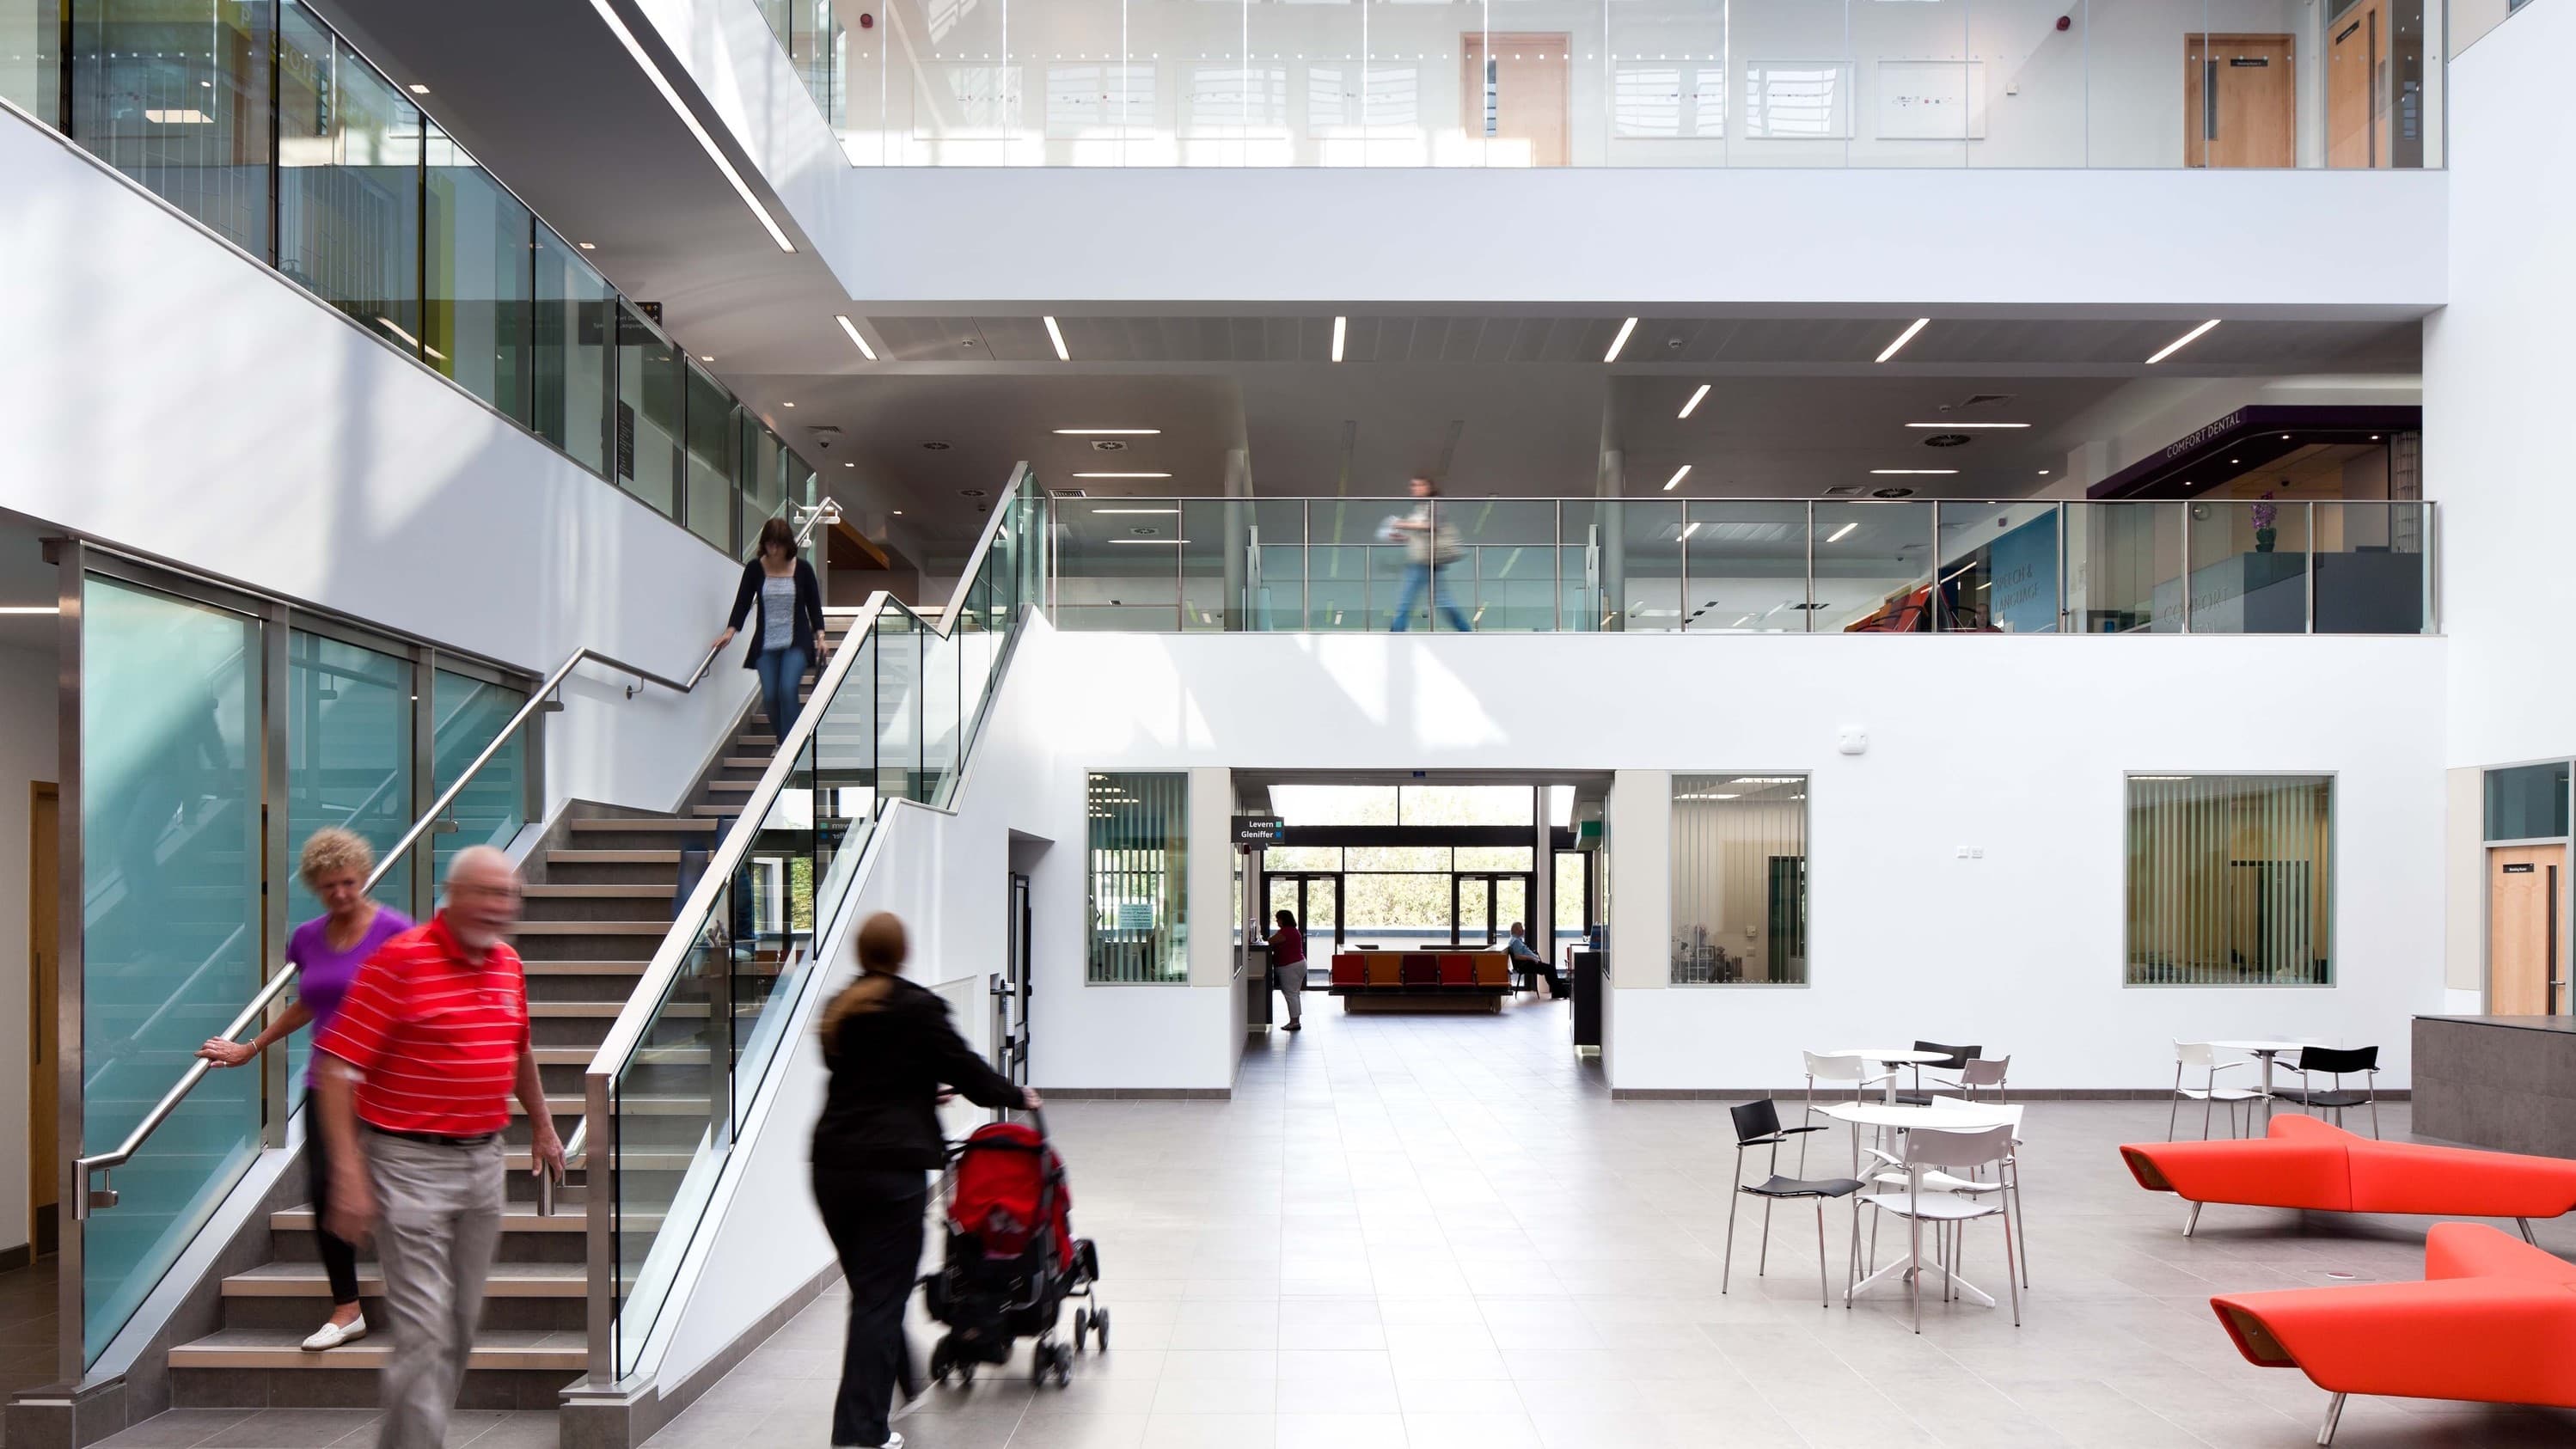 A health centre's double-height main area. There are people walking down a wide staircase on the left side and large windows at the far end of the space.